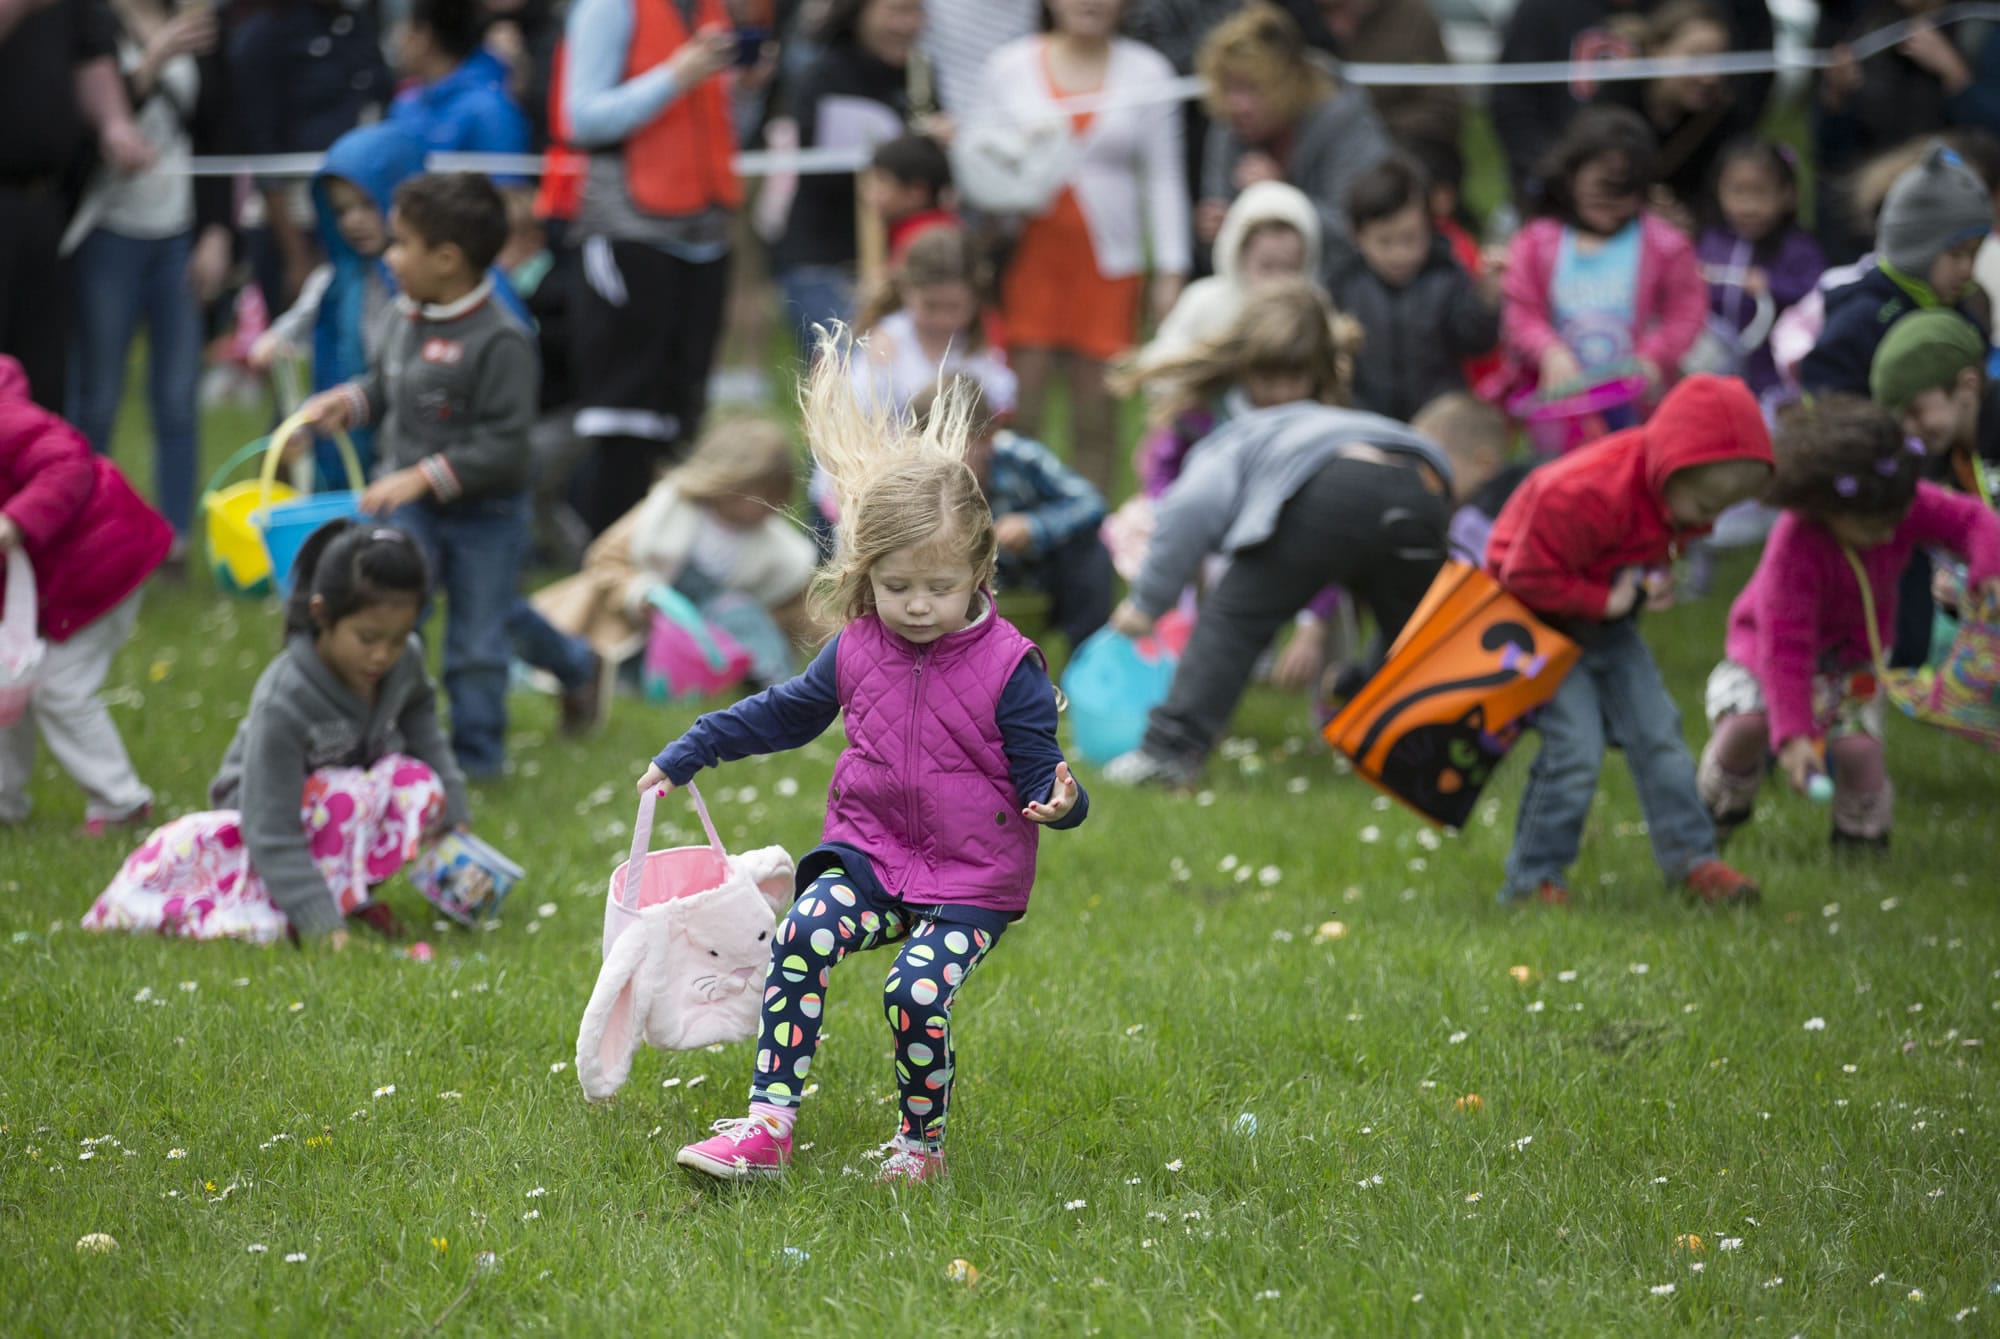 Four- and five-year-olds scramble at the start of the annual Easter egg hunt in Camas' Crown Park on Sunday. The hunt offered more than 14,000 eggs for different age groups to grab up. Photo by Randy L.